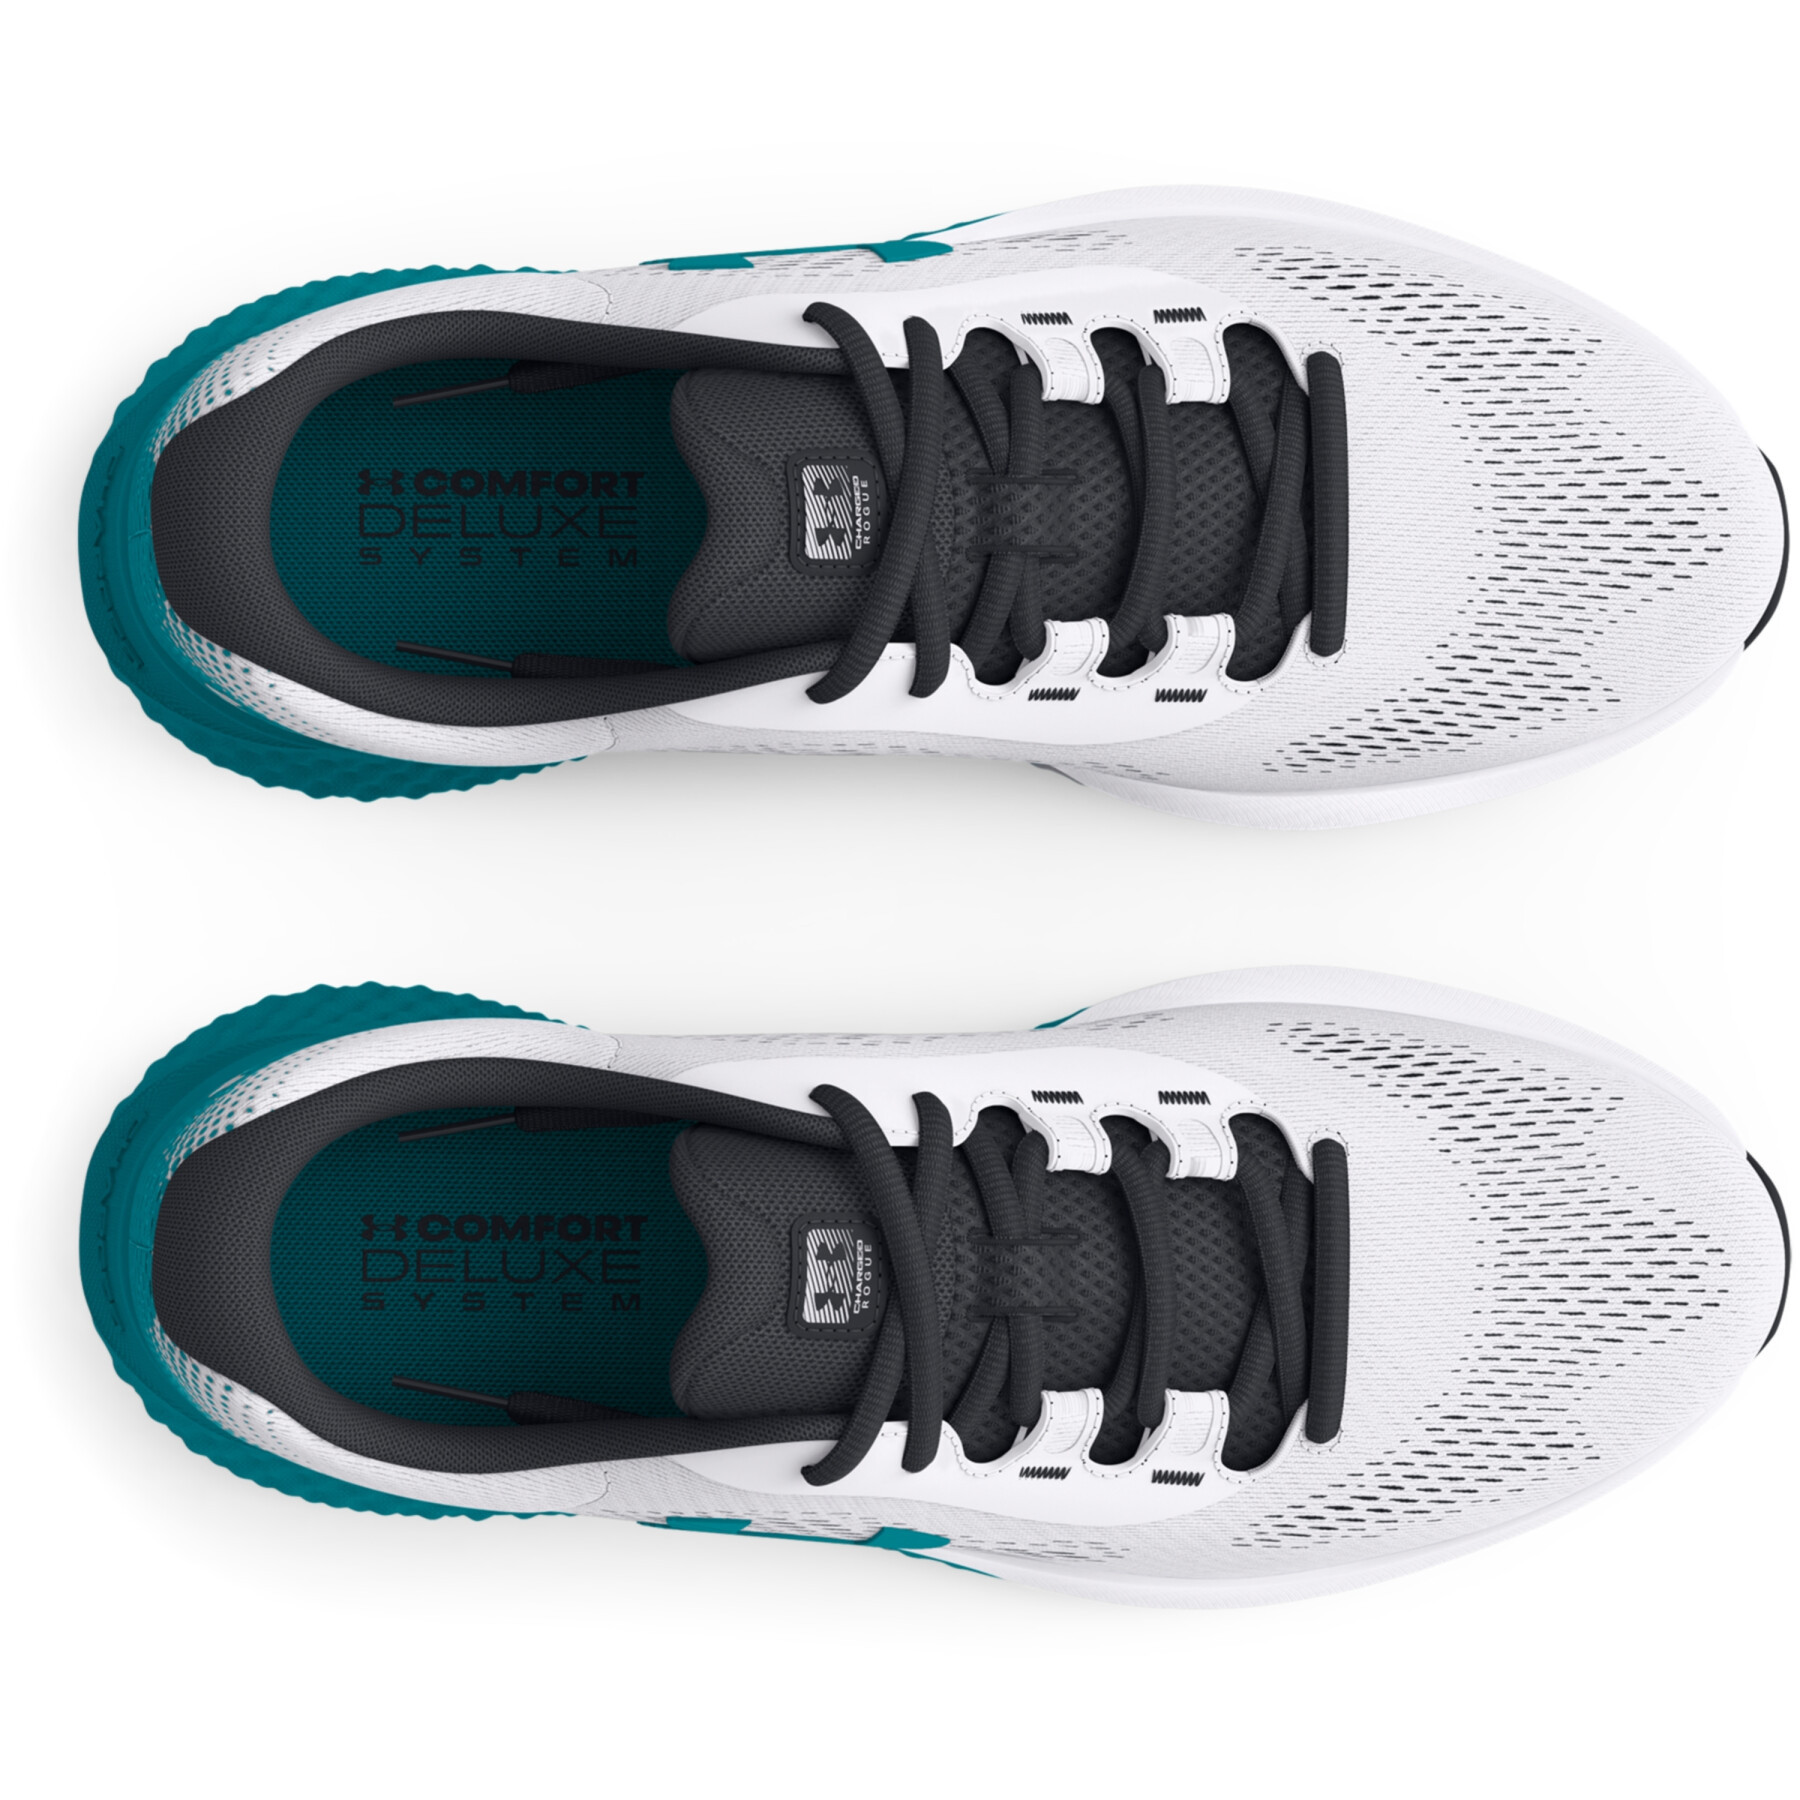 Chaussures de running Under Armour Charged Rogue 4